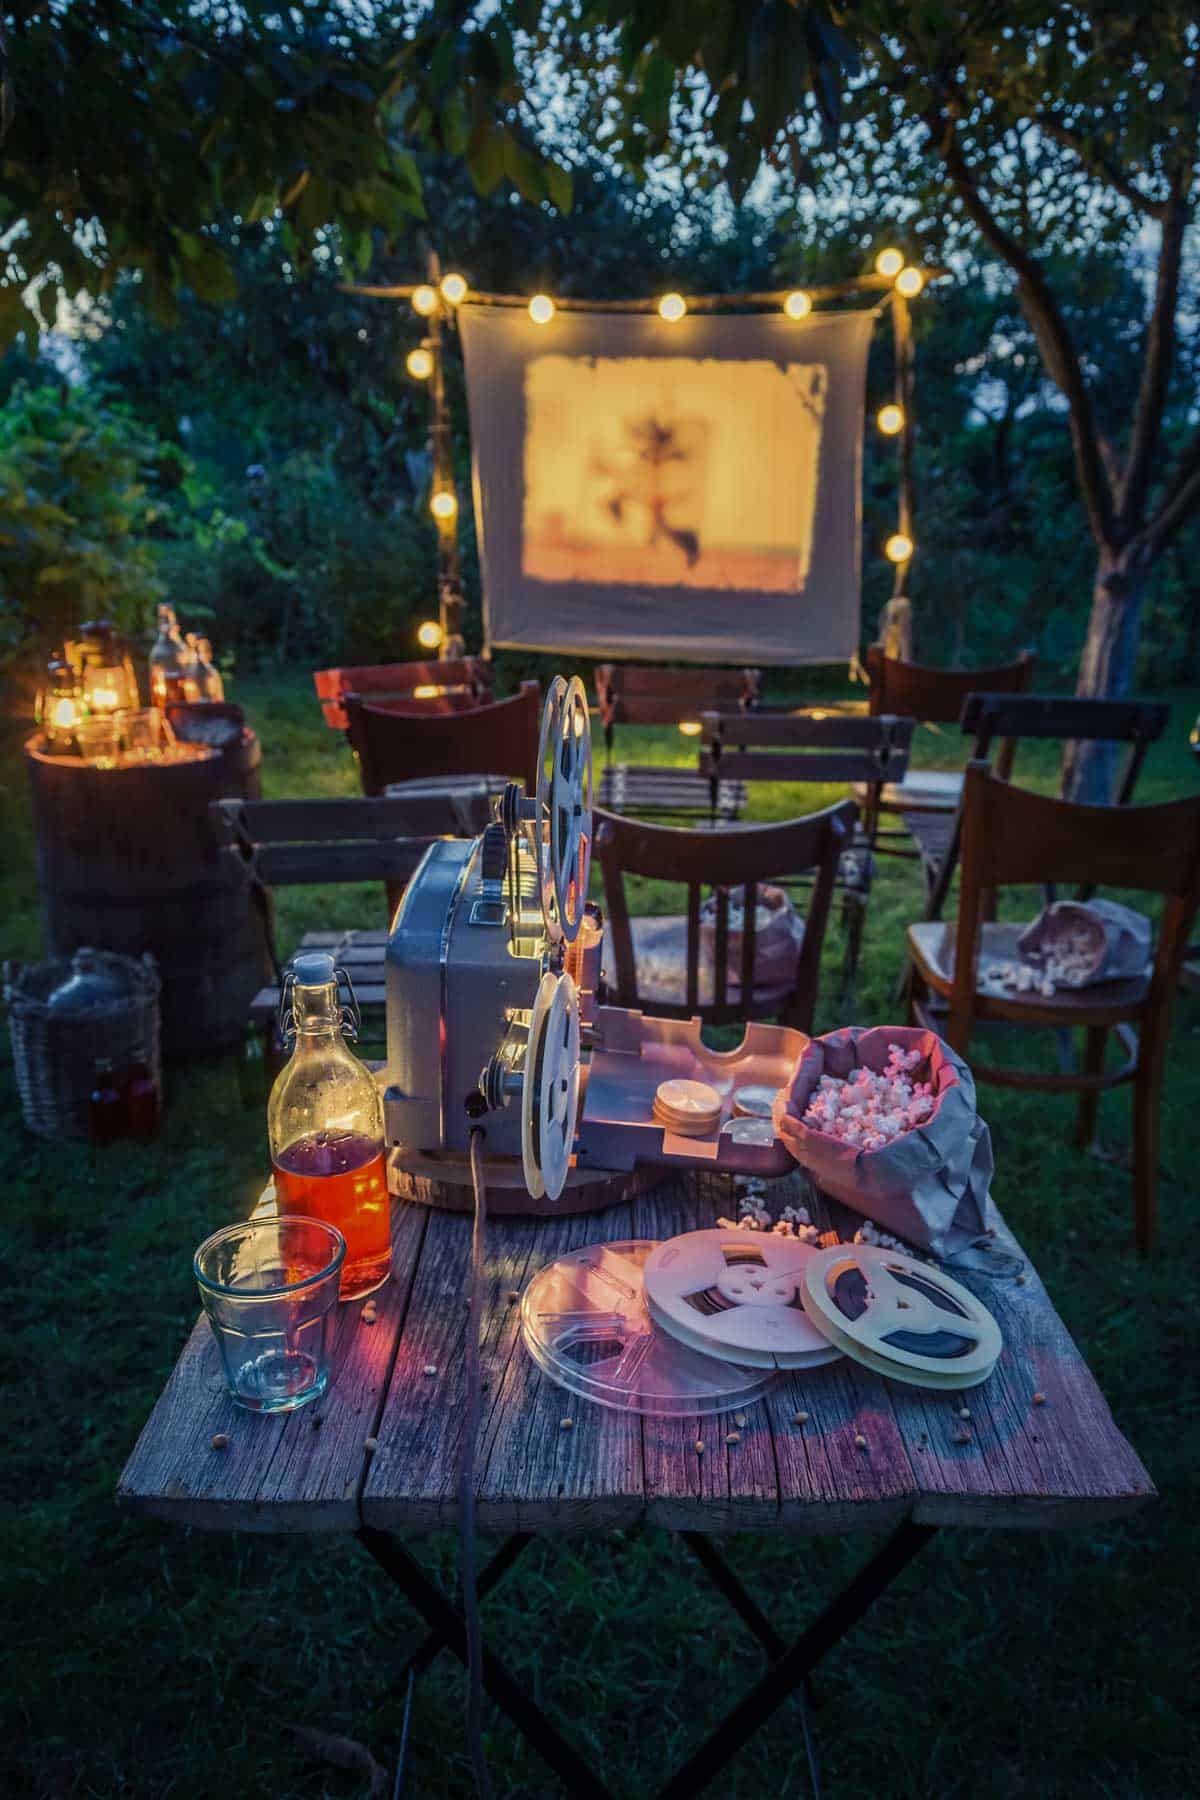 A table with a movie projector set up in a backyard.